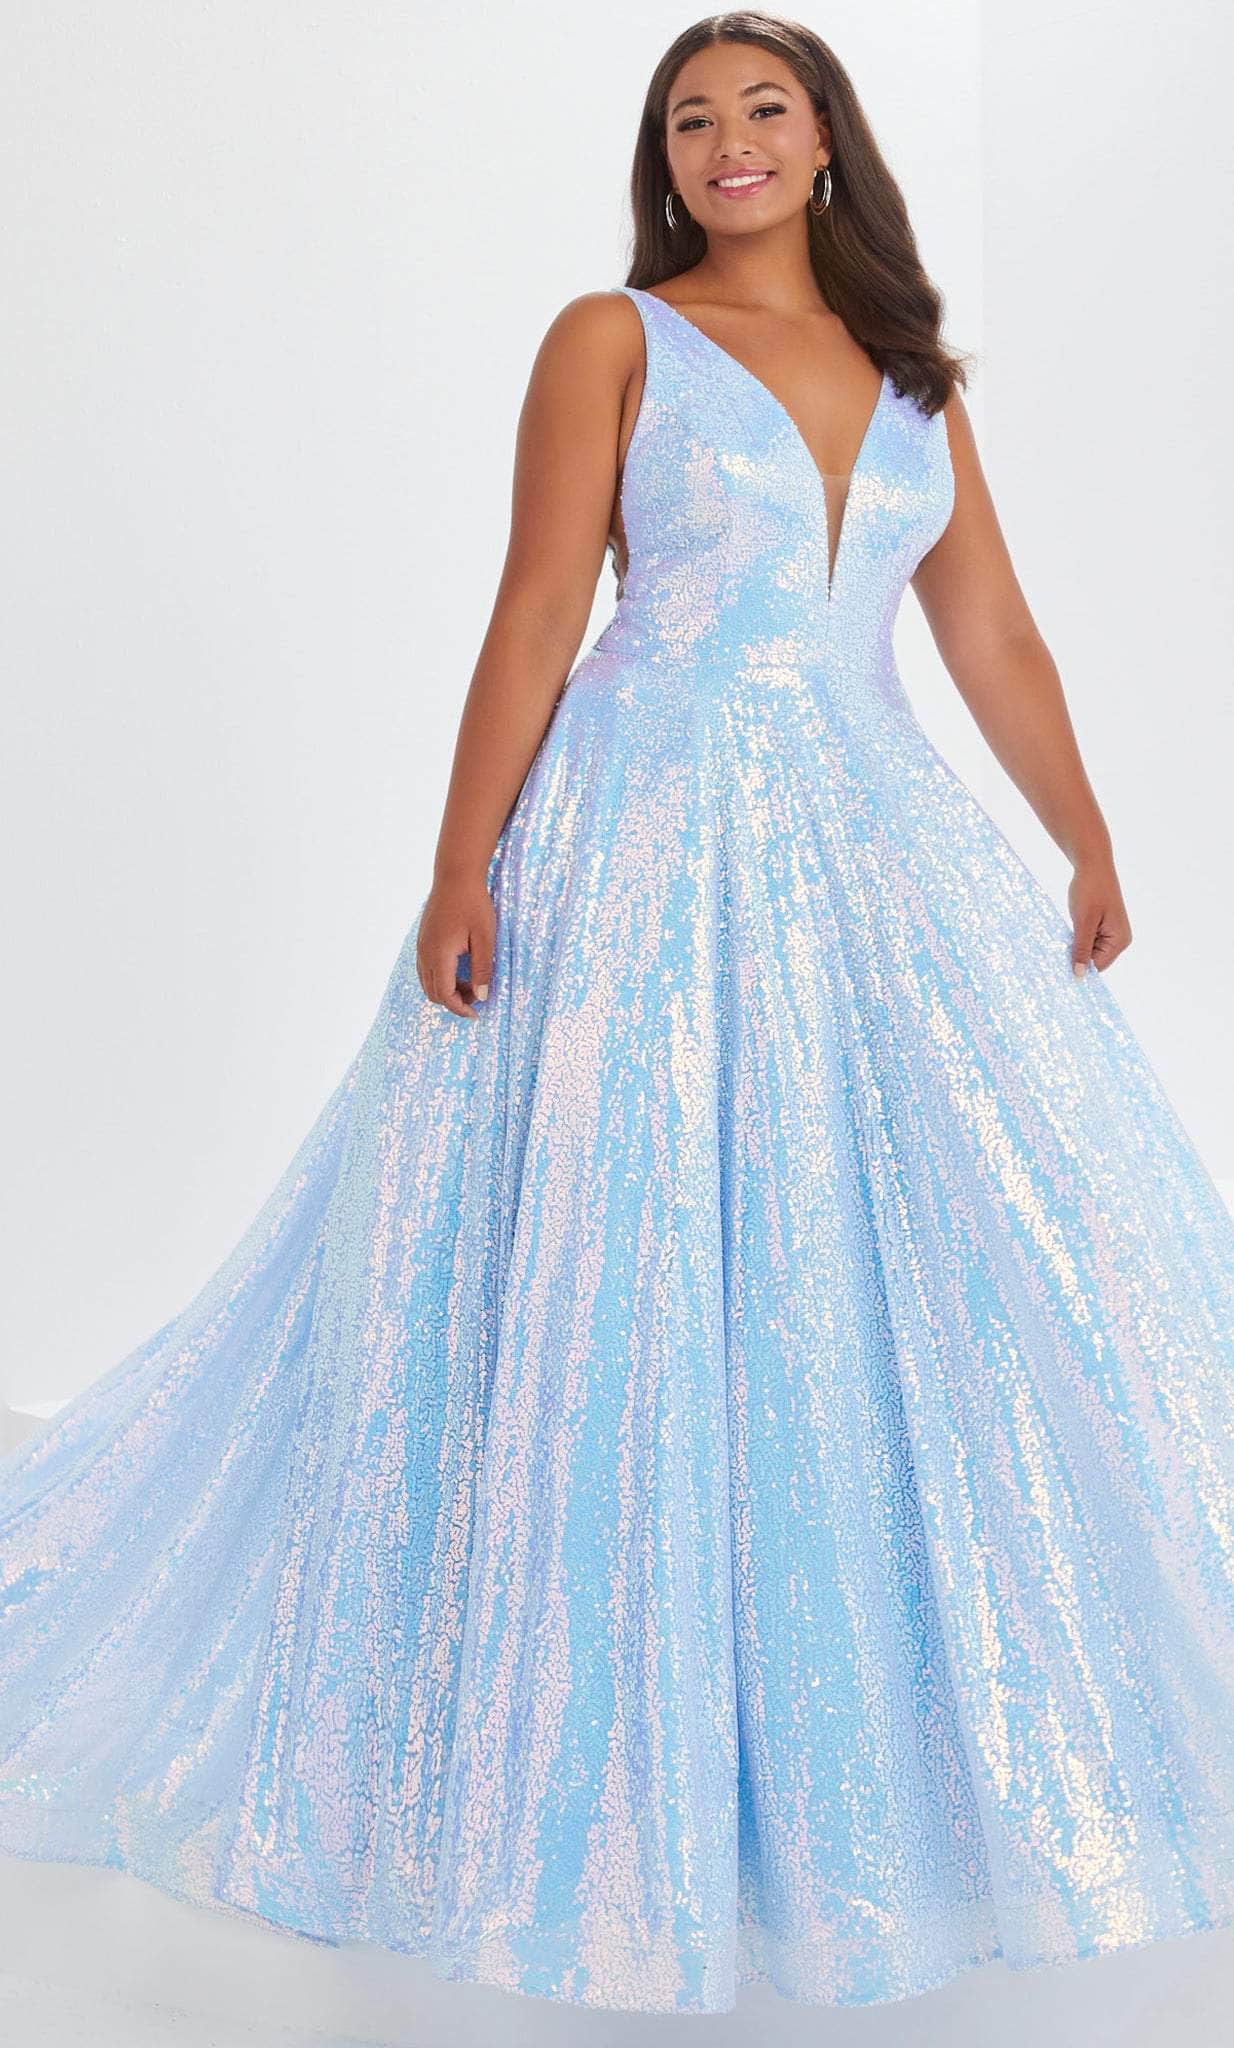 Image of Tiffany Designs by Christina Wu 16046 - Plunging Sequined Prom Gown